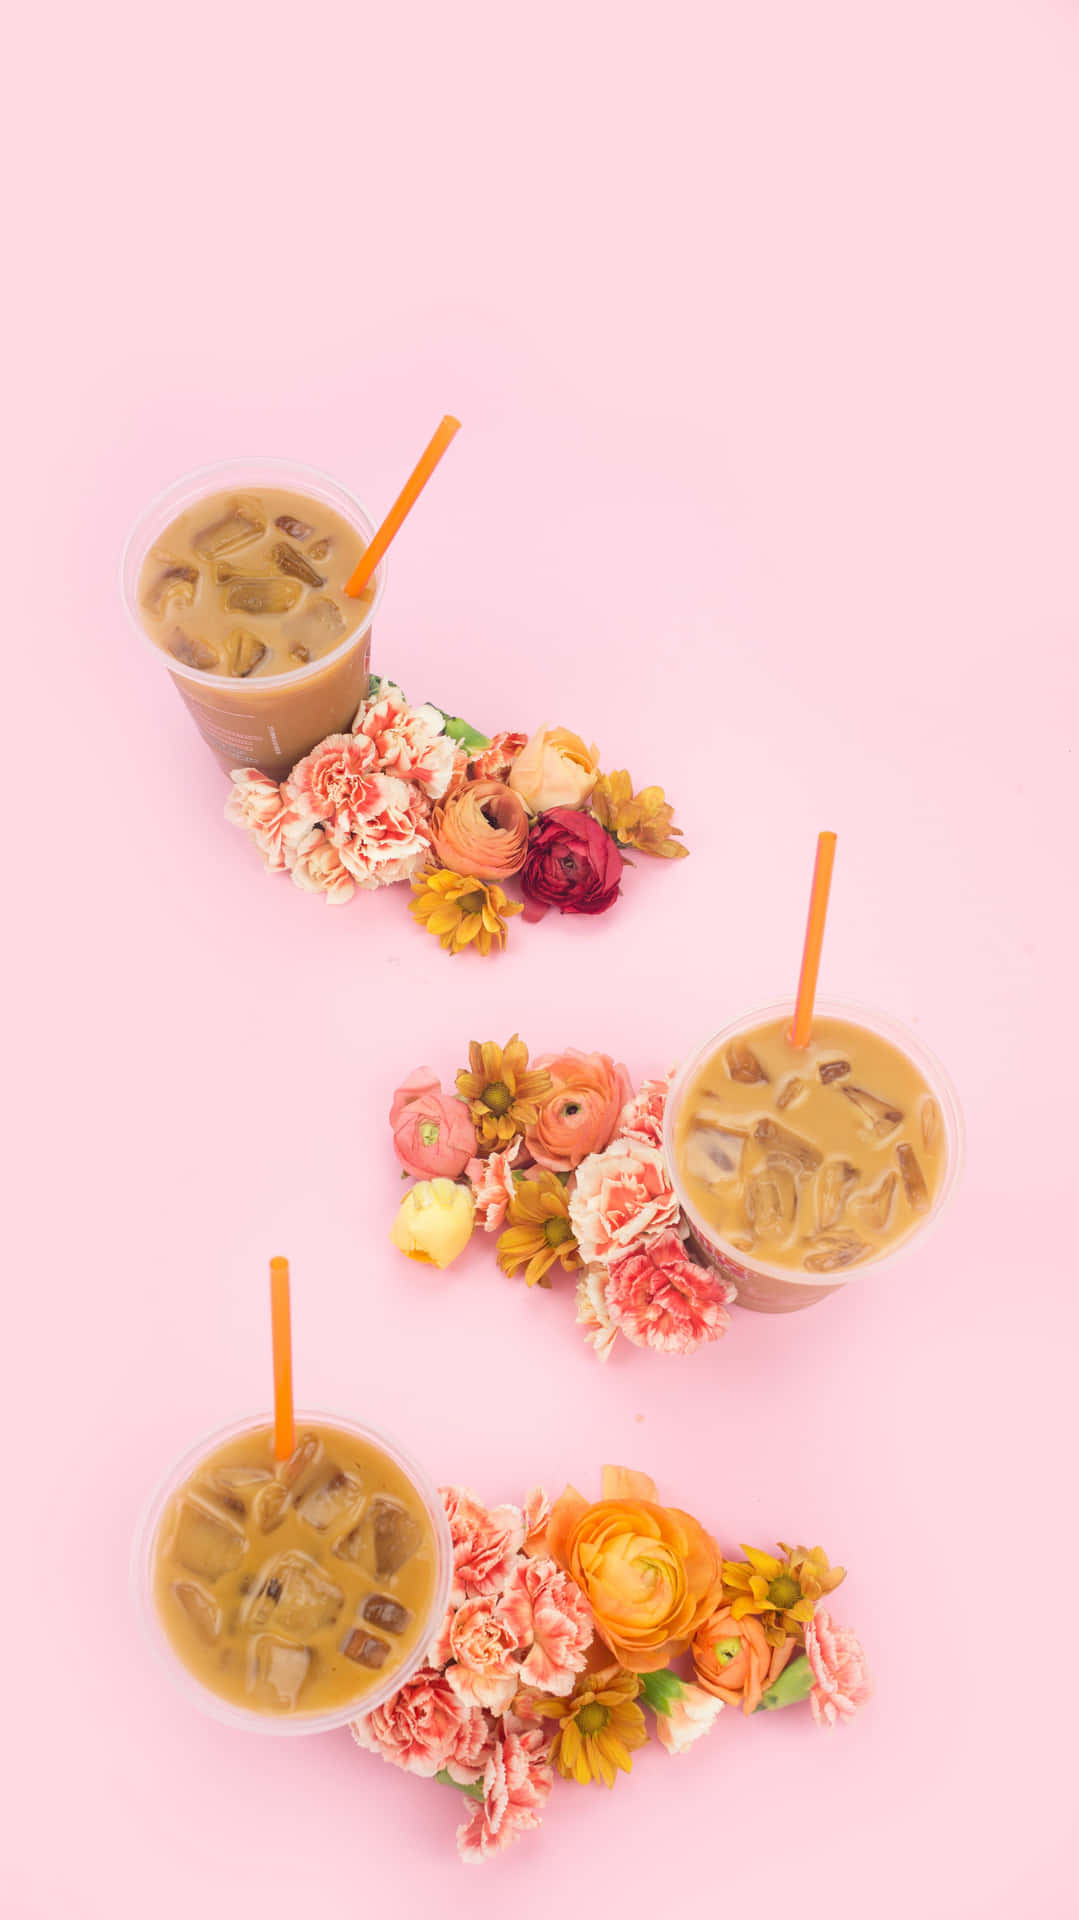 Delicious Dunkin Donuts treats – perfect for any occasion!